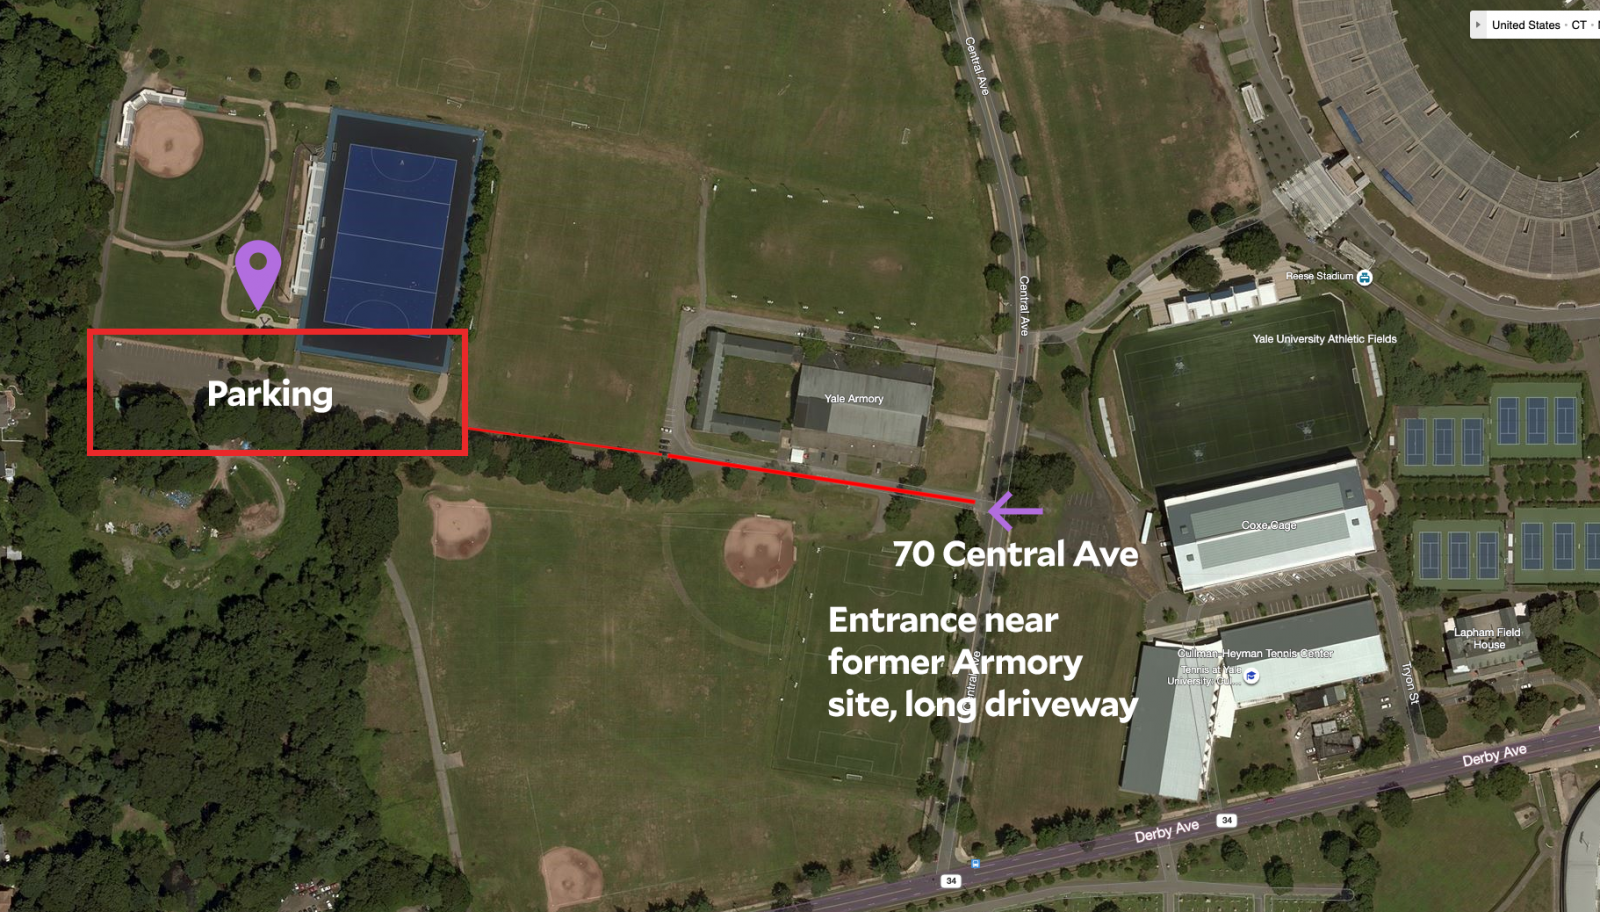 Map of Field House Location with an arrow to the driveway entrance